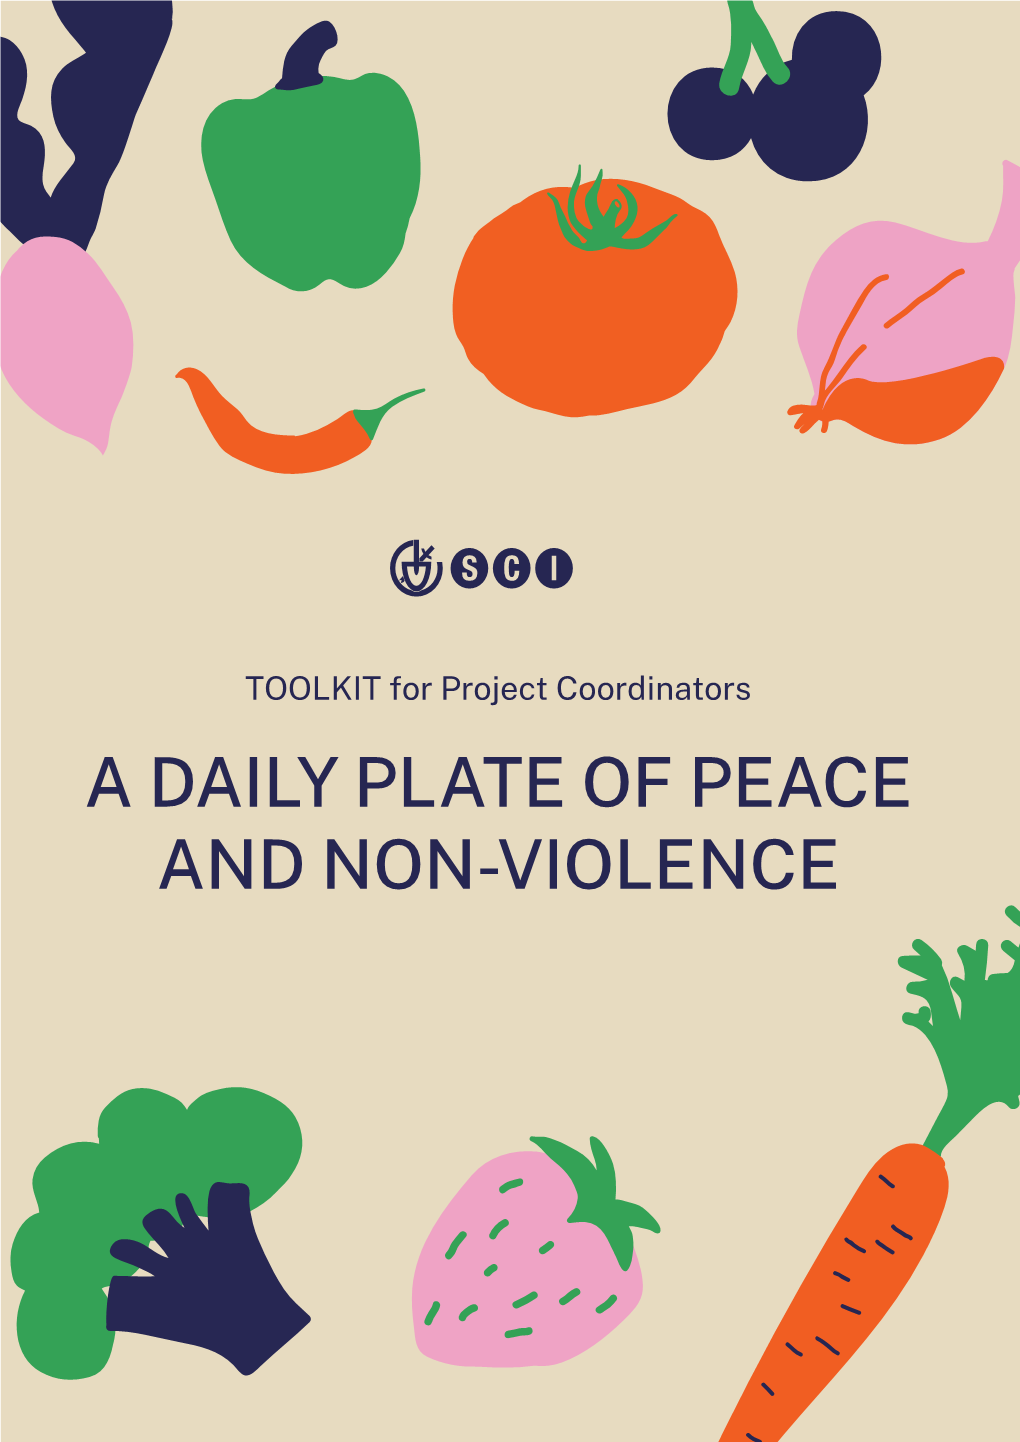 A Daily Plate of Peace and Non-Violence